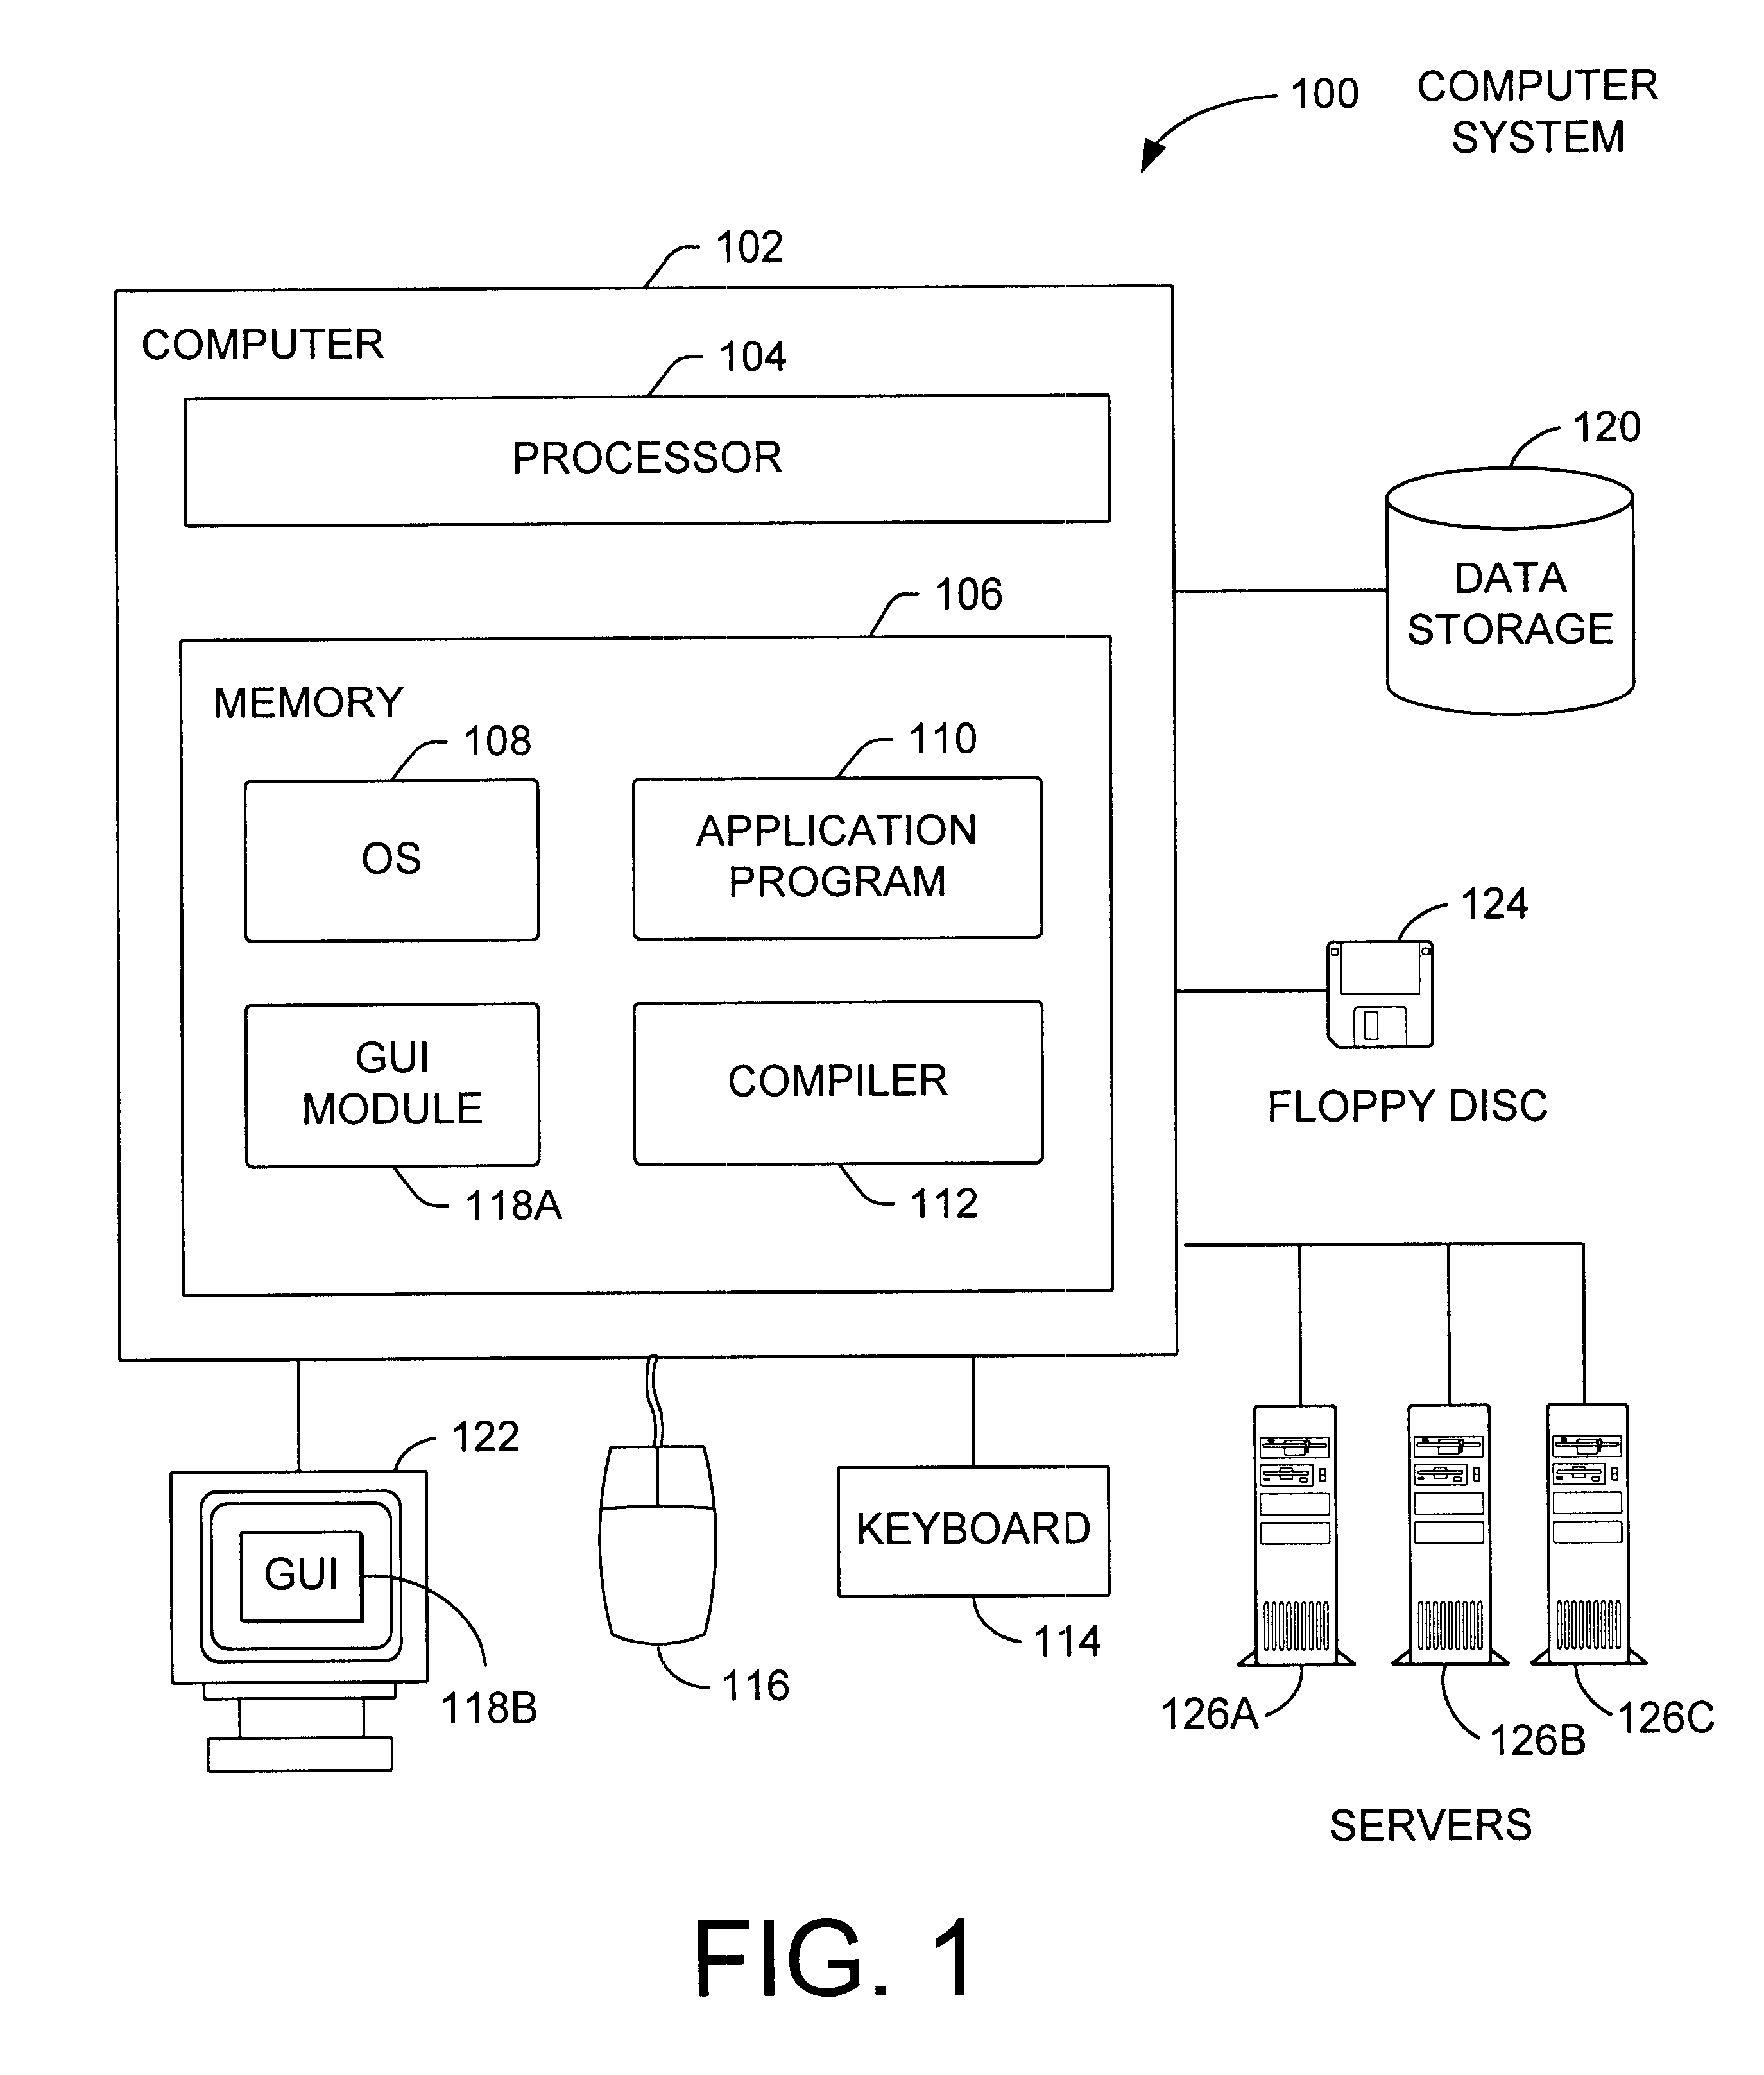 Method and apparatus for transforming queries